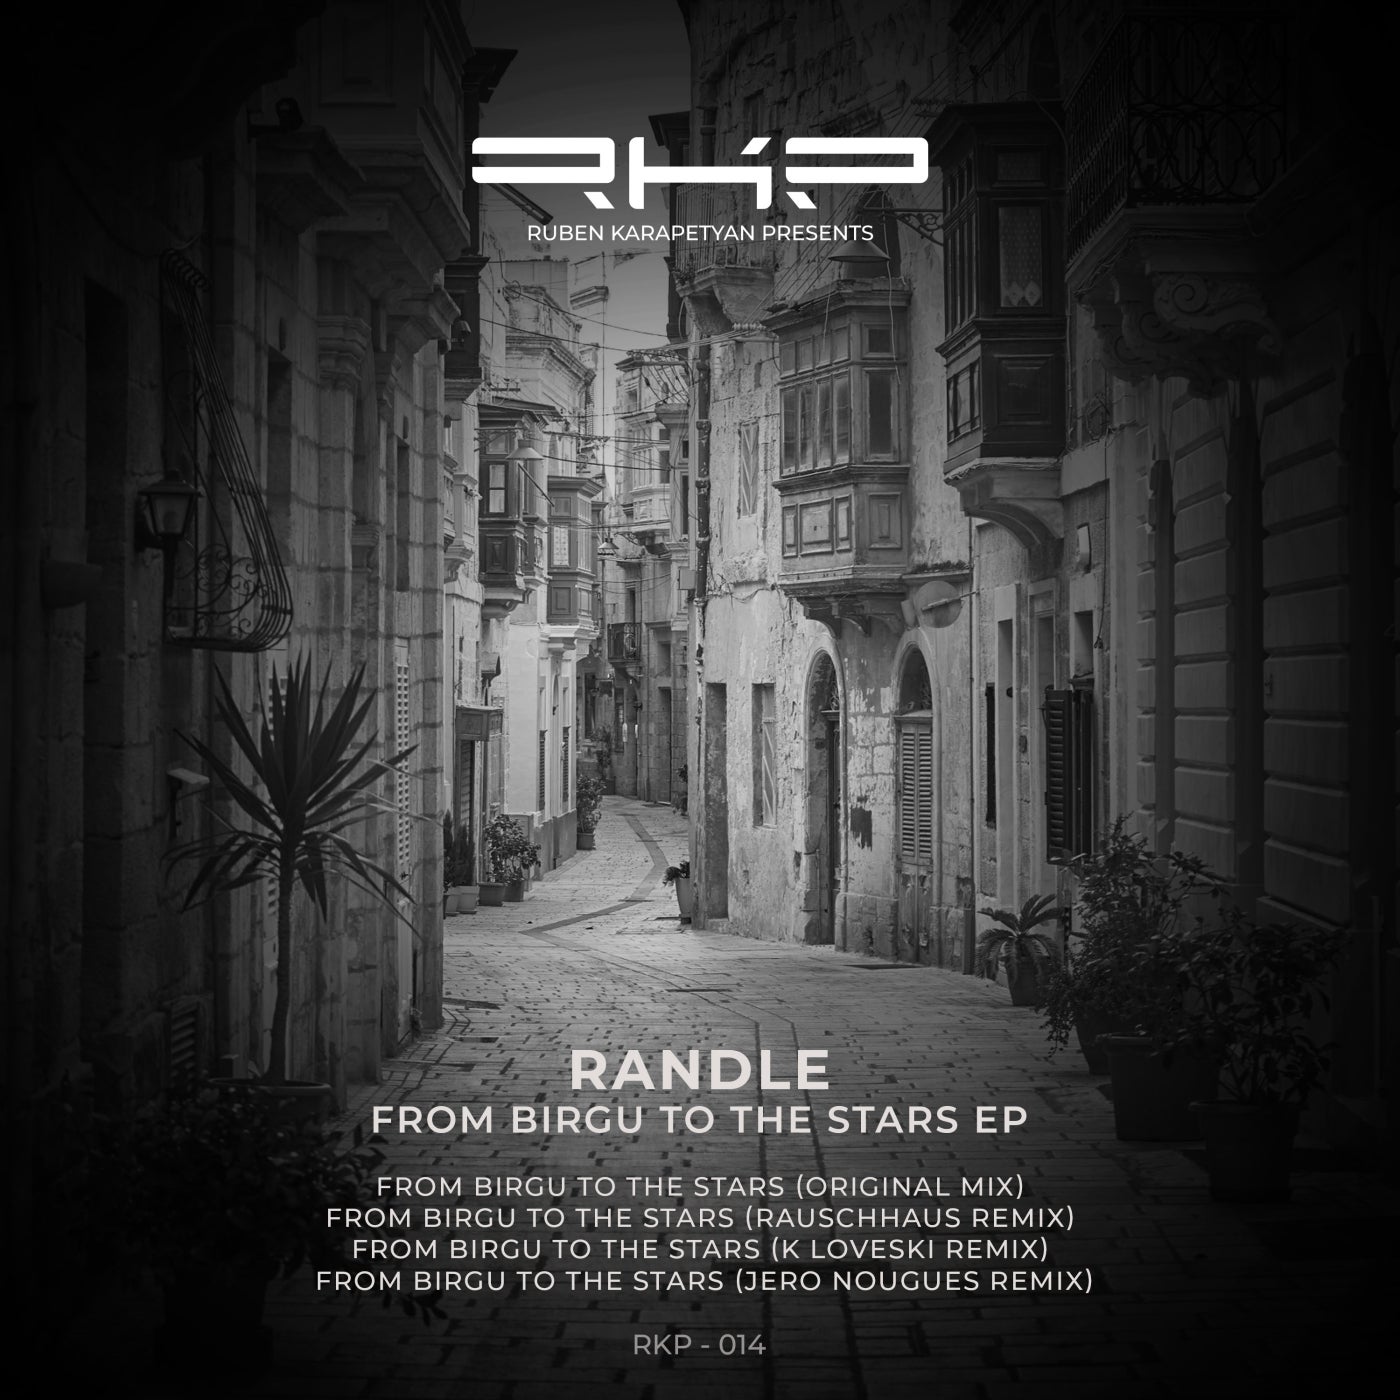 Cover - Randle - From Birgu to the Stars (Original Mix)